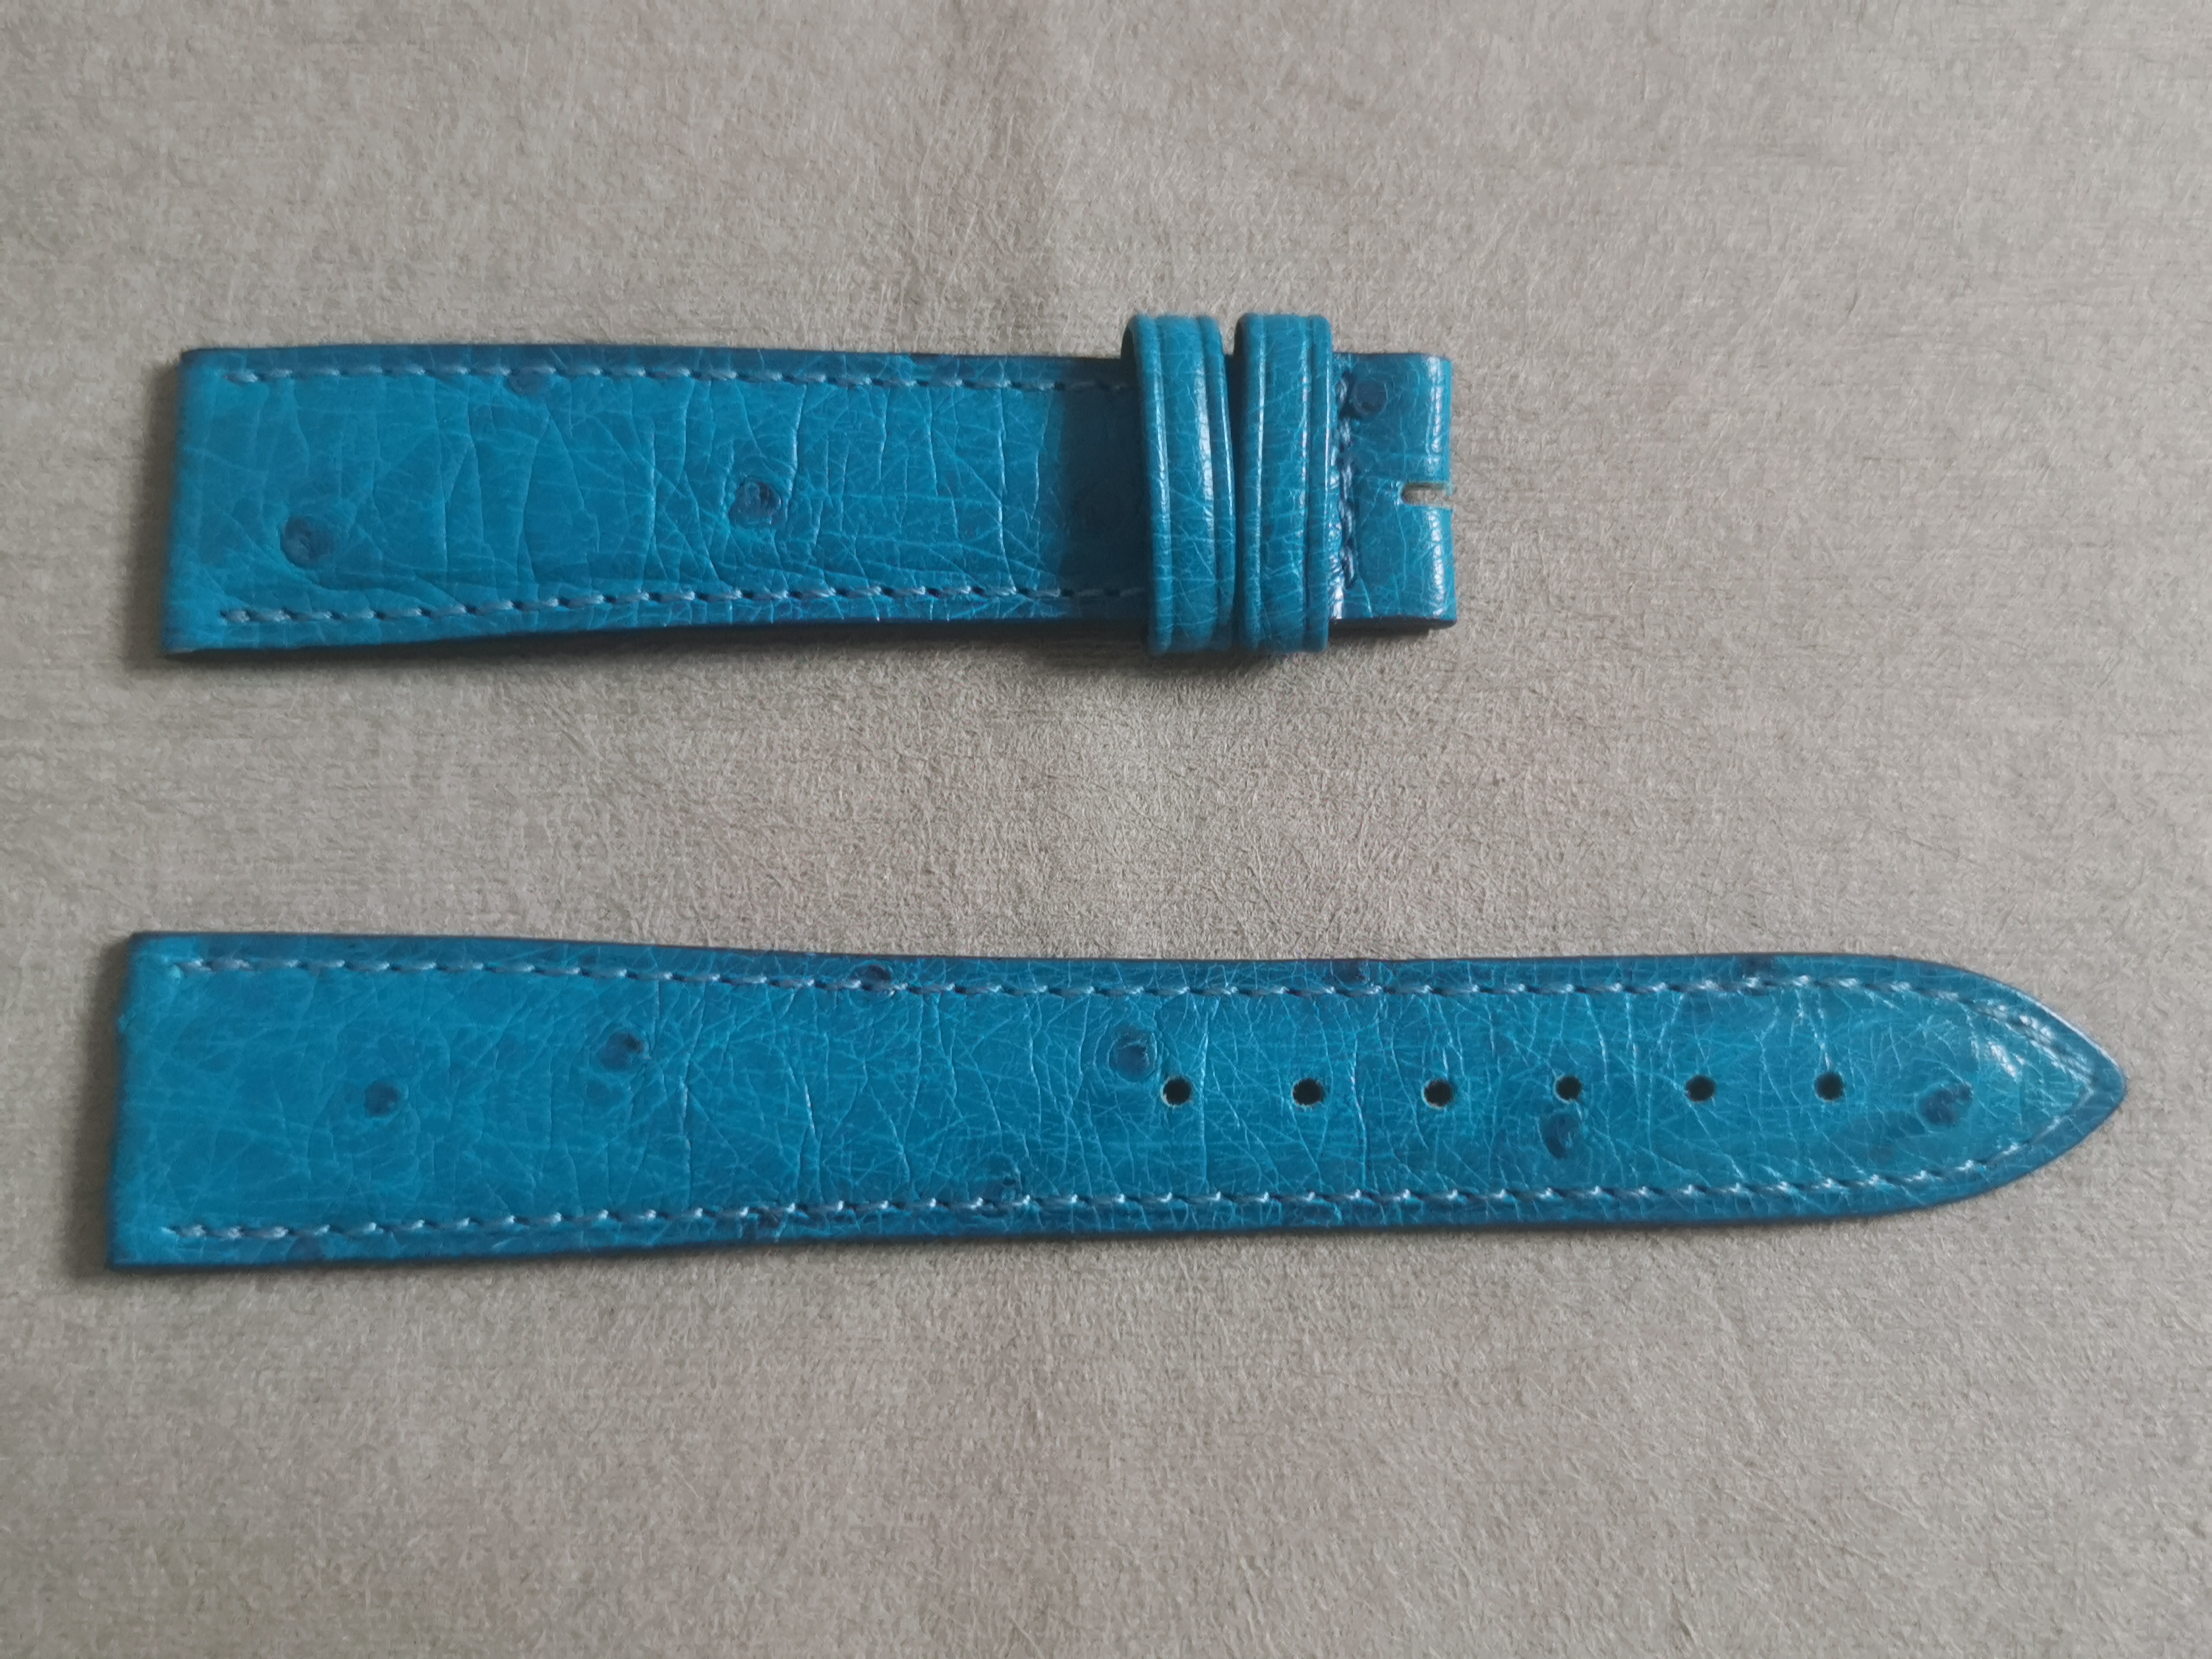 Jaeger-LeCoultre vintage ostrich ligth blue leather strap mm 19 - 16 newoldstock condition | San Giorgio a Cremano